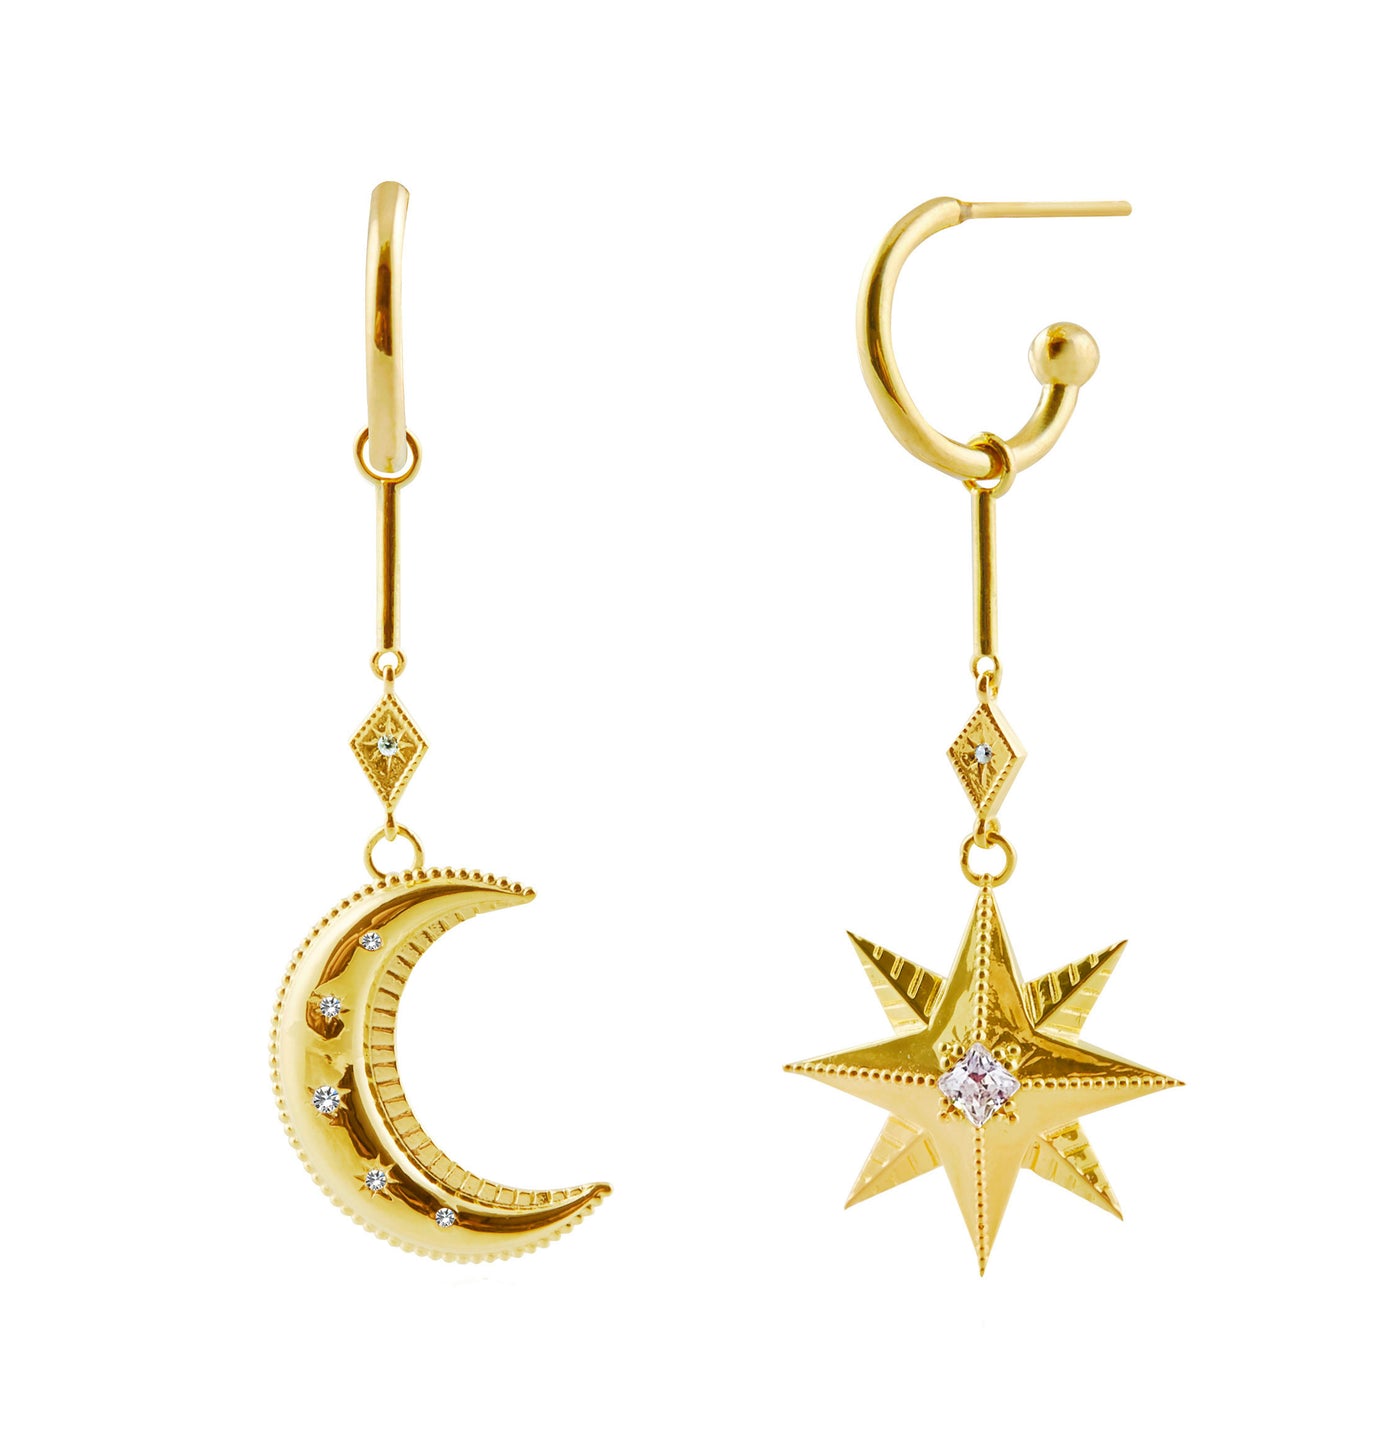 Statement gold bar star and moon drop hoop earrings with CZ crystals